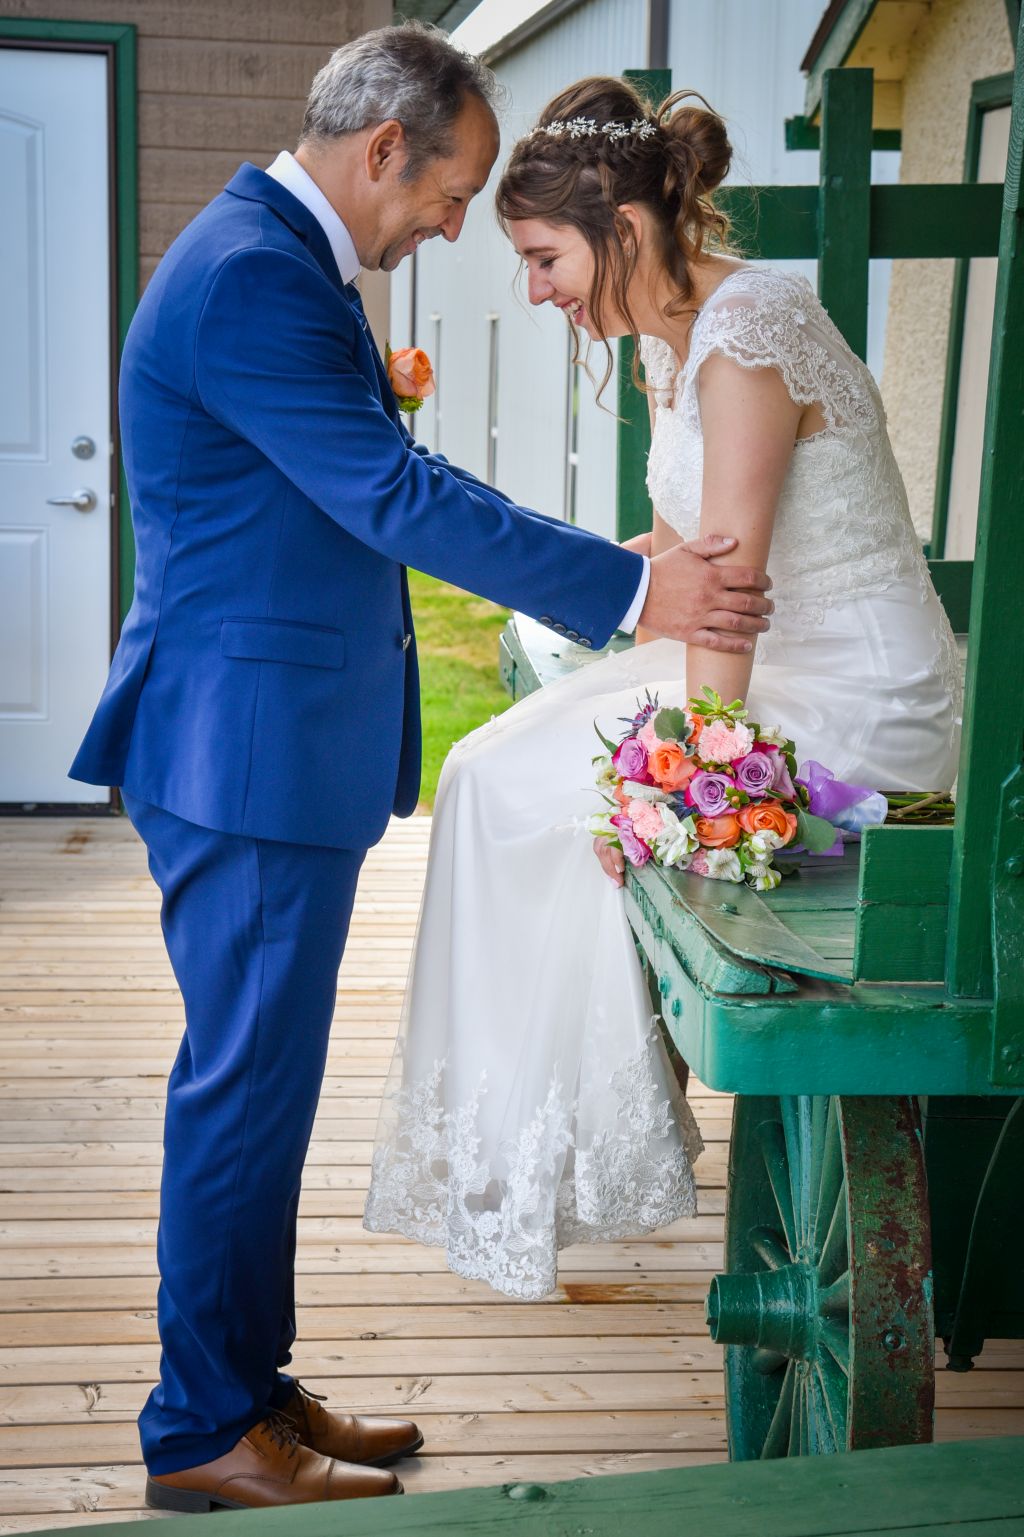 A groom in a navy blue suit shares a joke with his beautiful bride, while she is seated outdoors on a pioneer cart